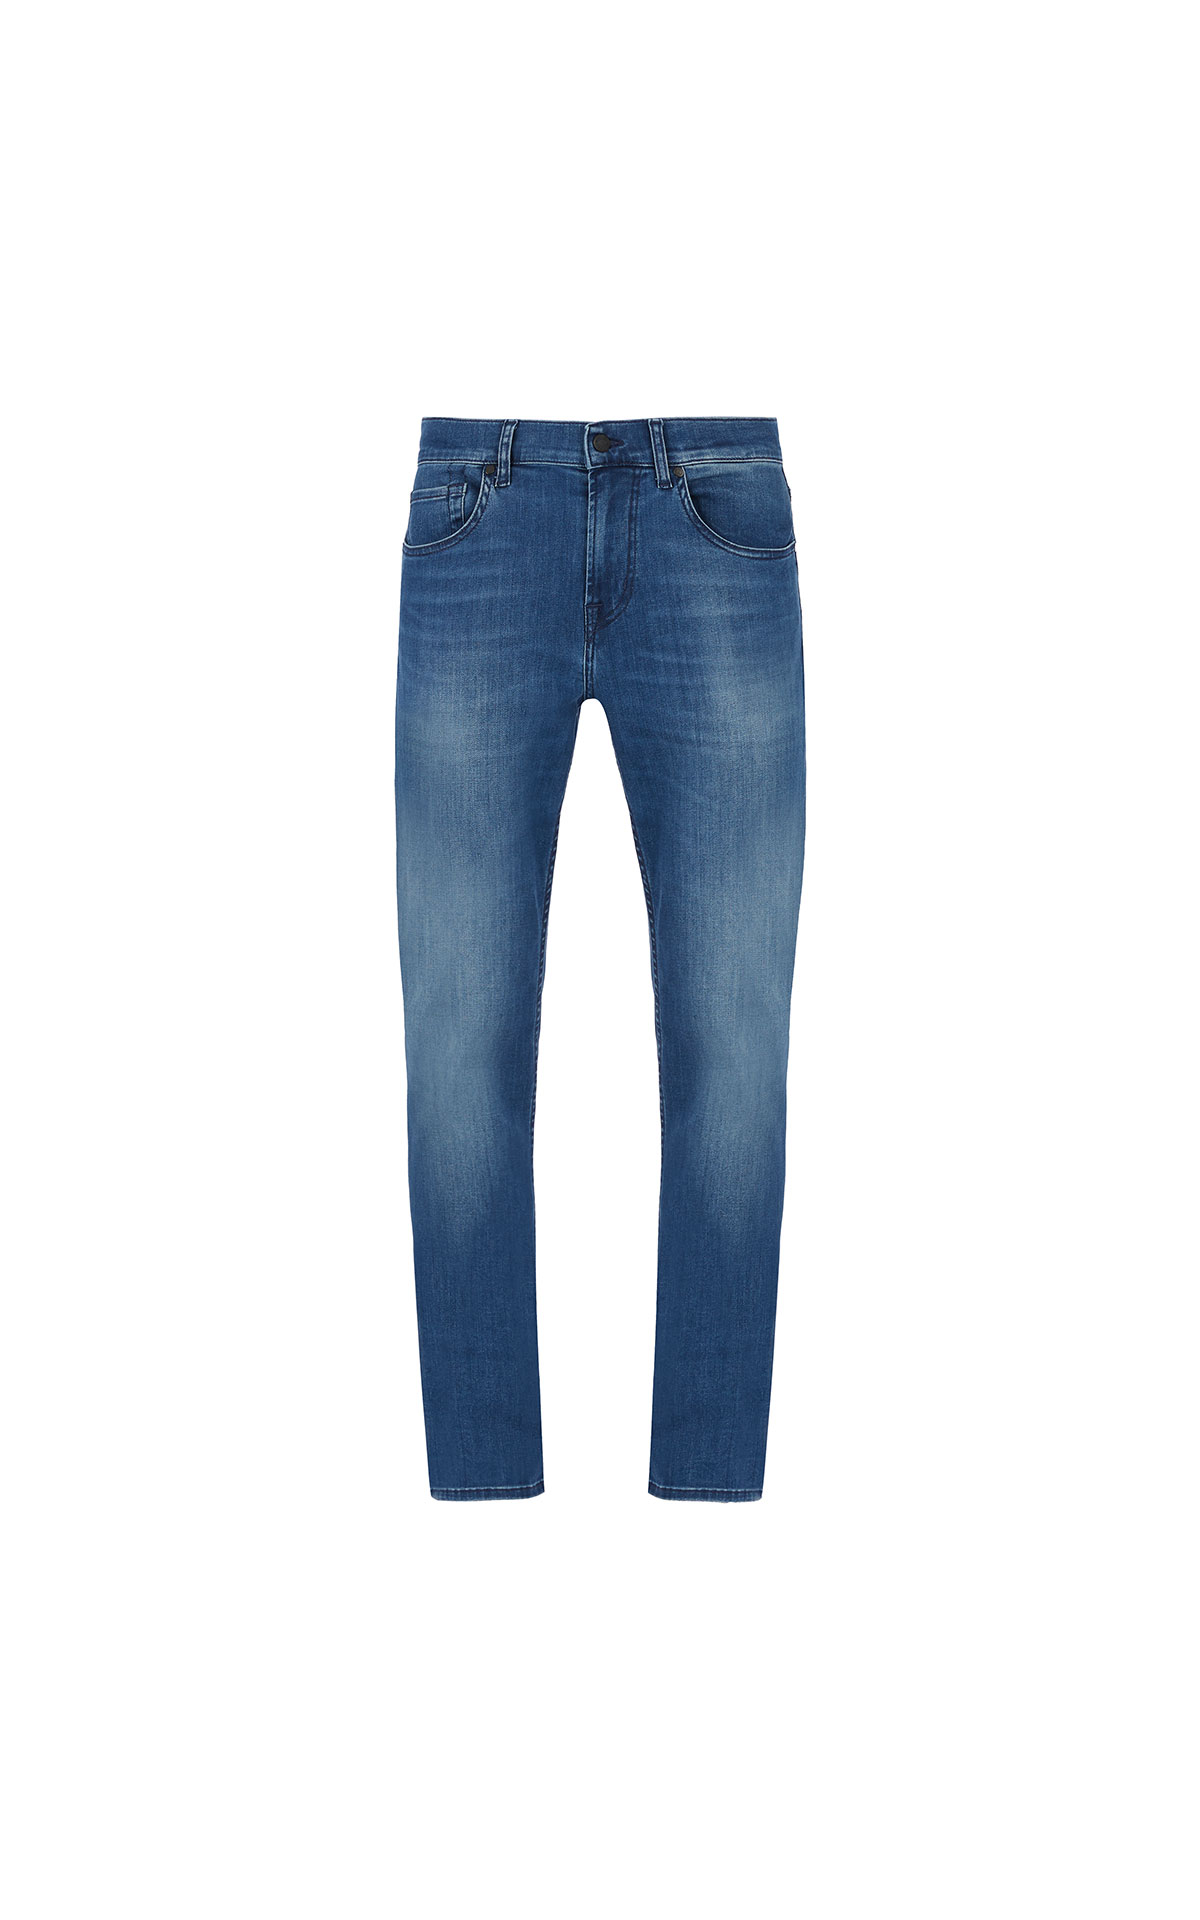 7 For all Mankind Slimmy jean  from Bicester Village